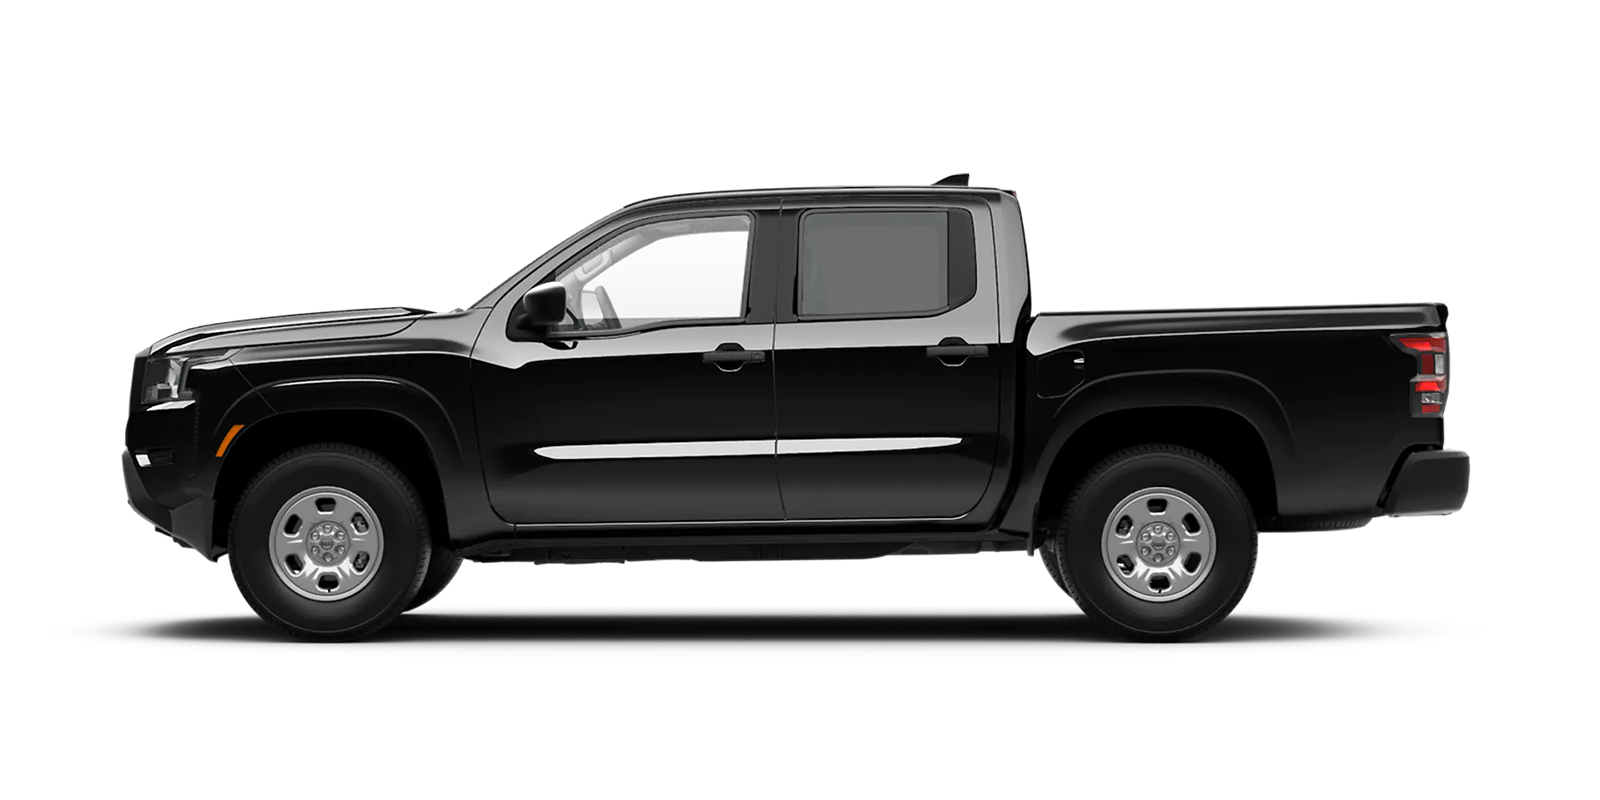 2022 Frontier Crew Cab S 4x4 in Super Black | Wallace Nissan of Kingsport in Kingsport TN